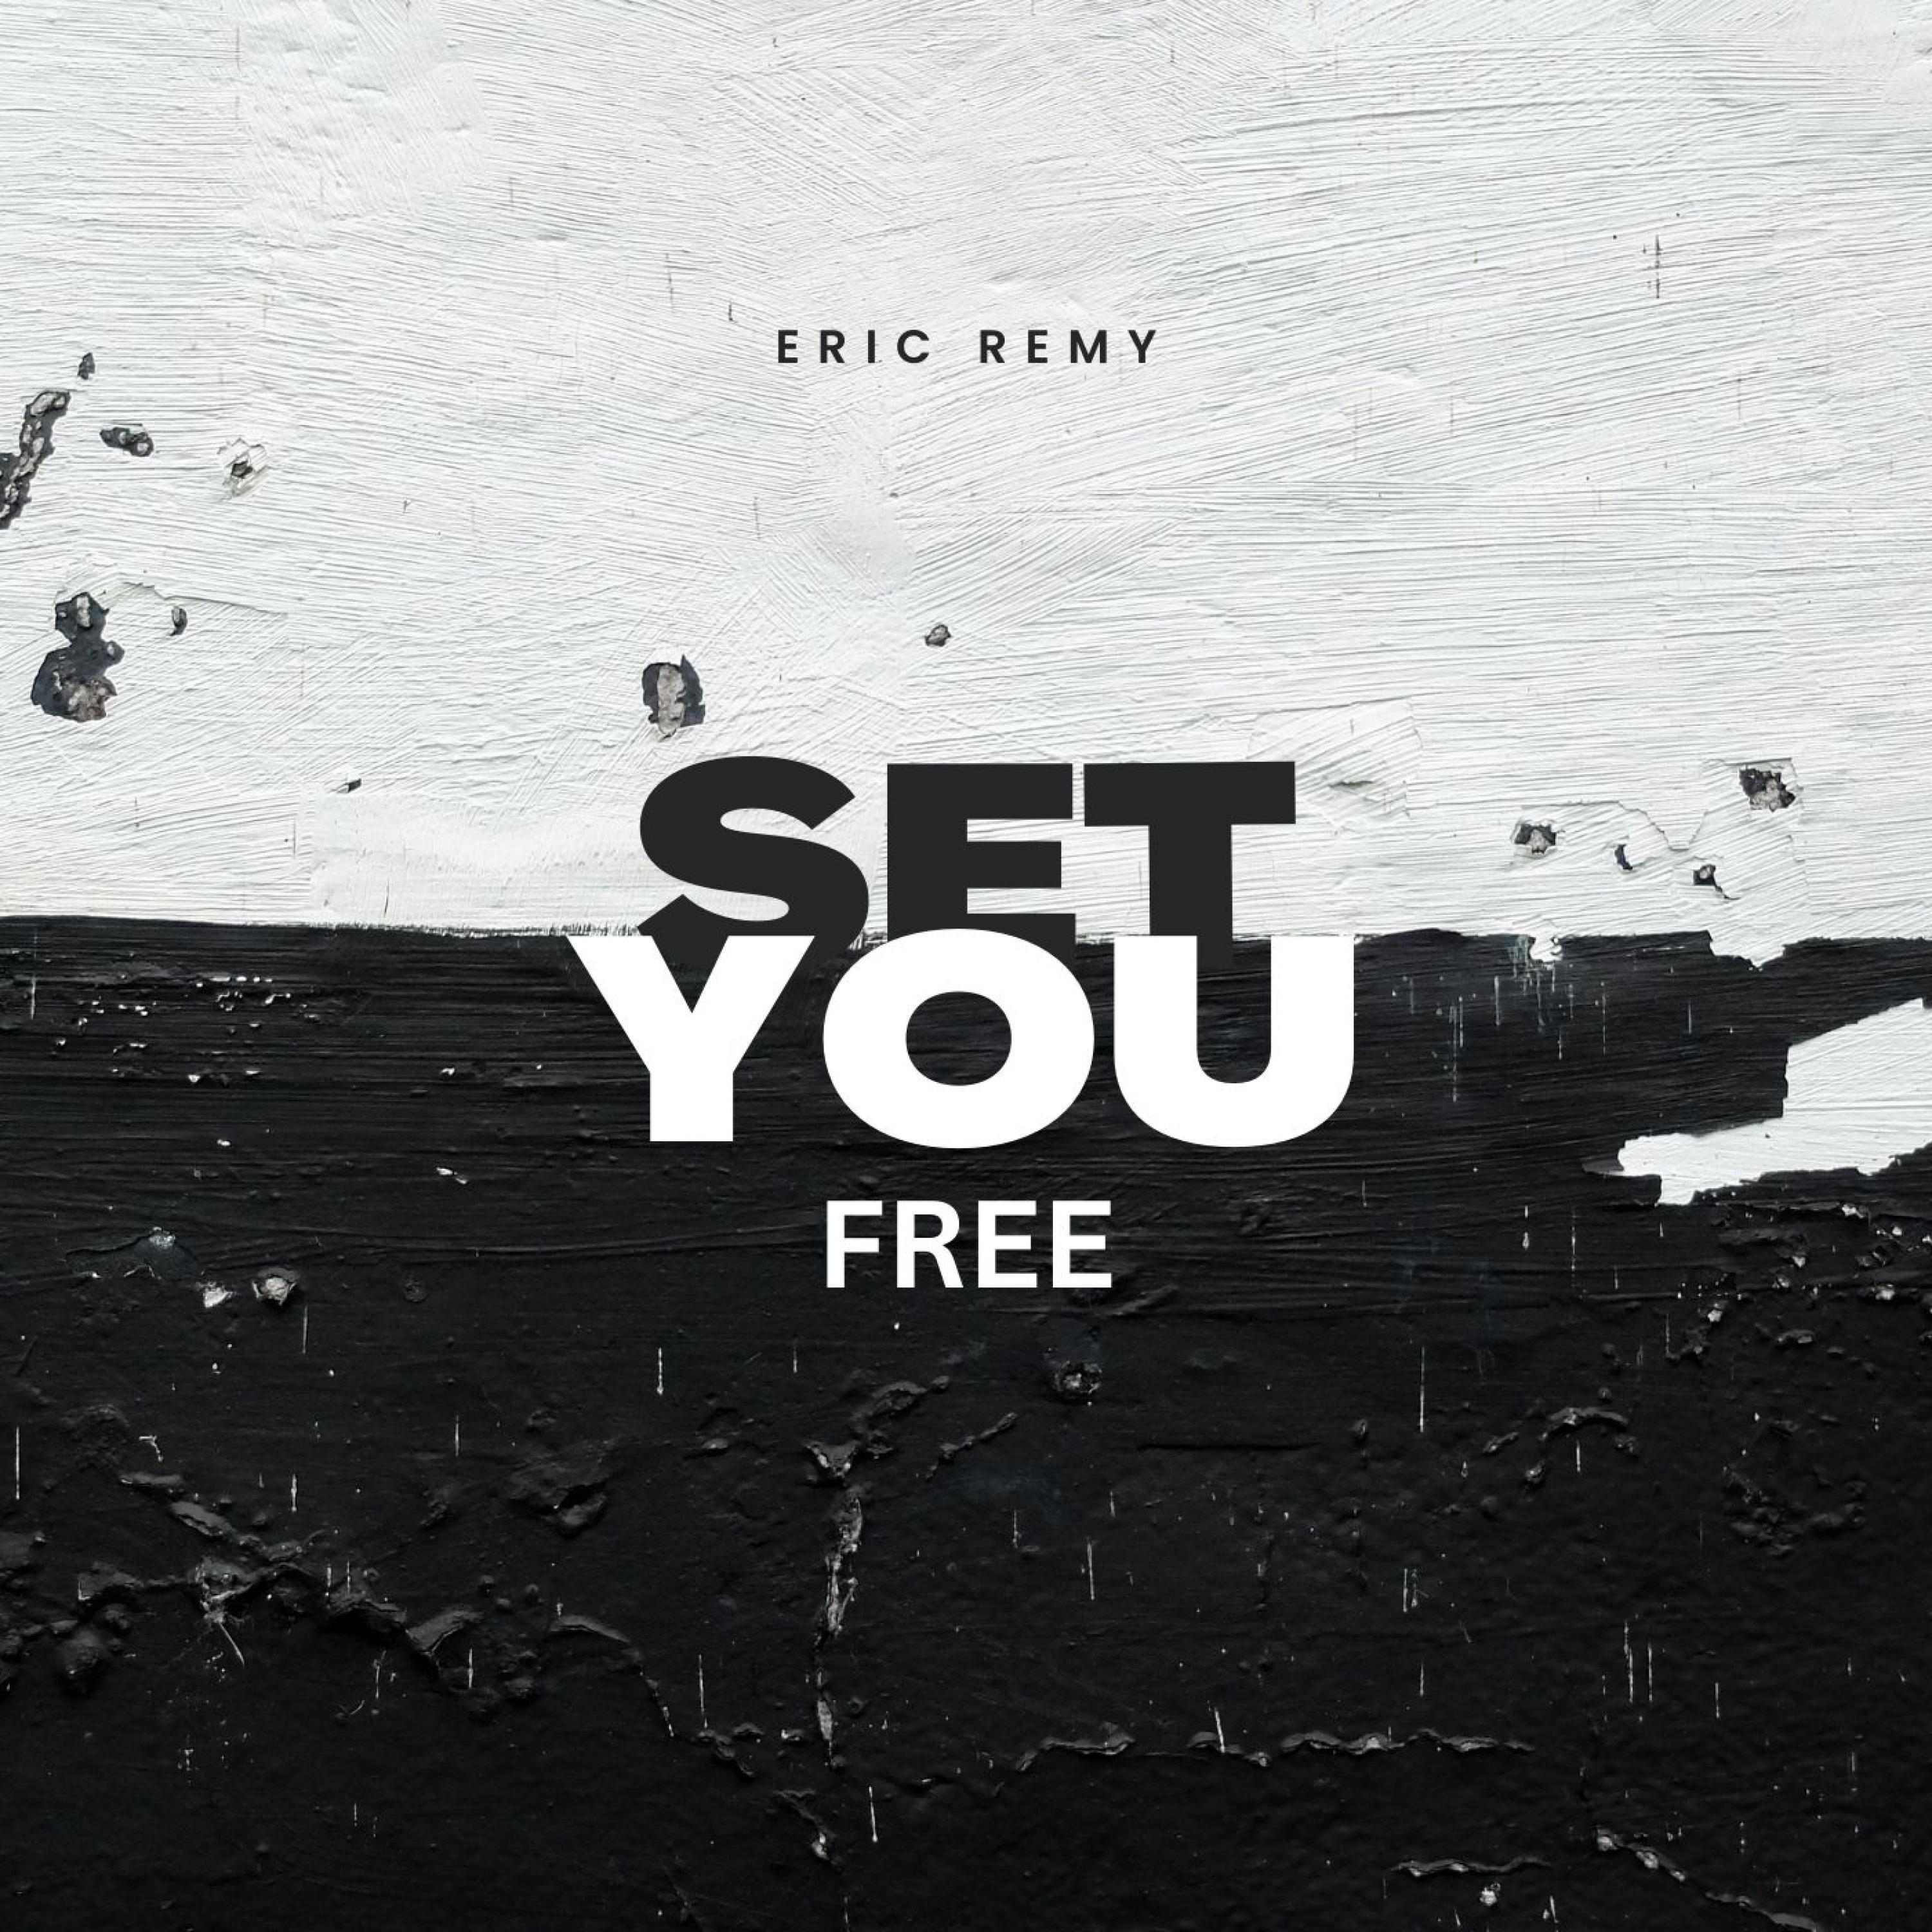 Eric Remy - Set you free